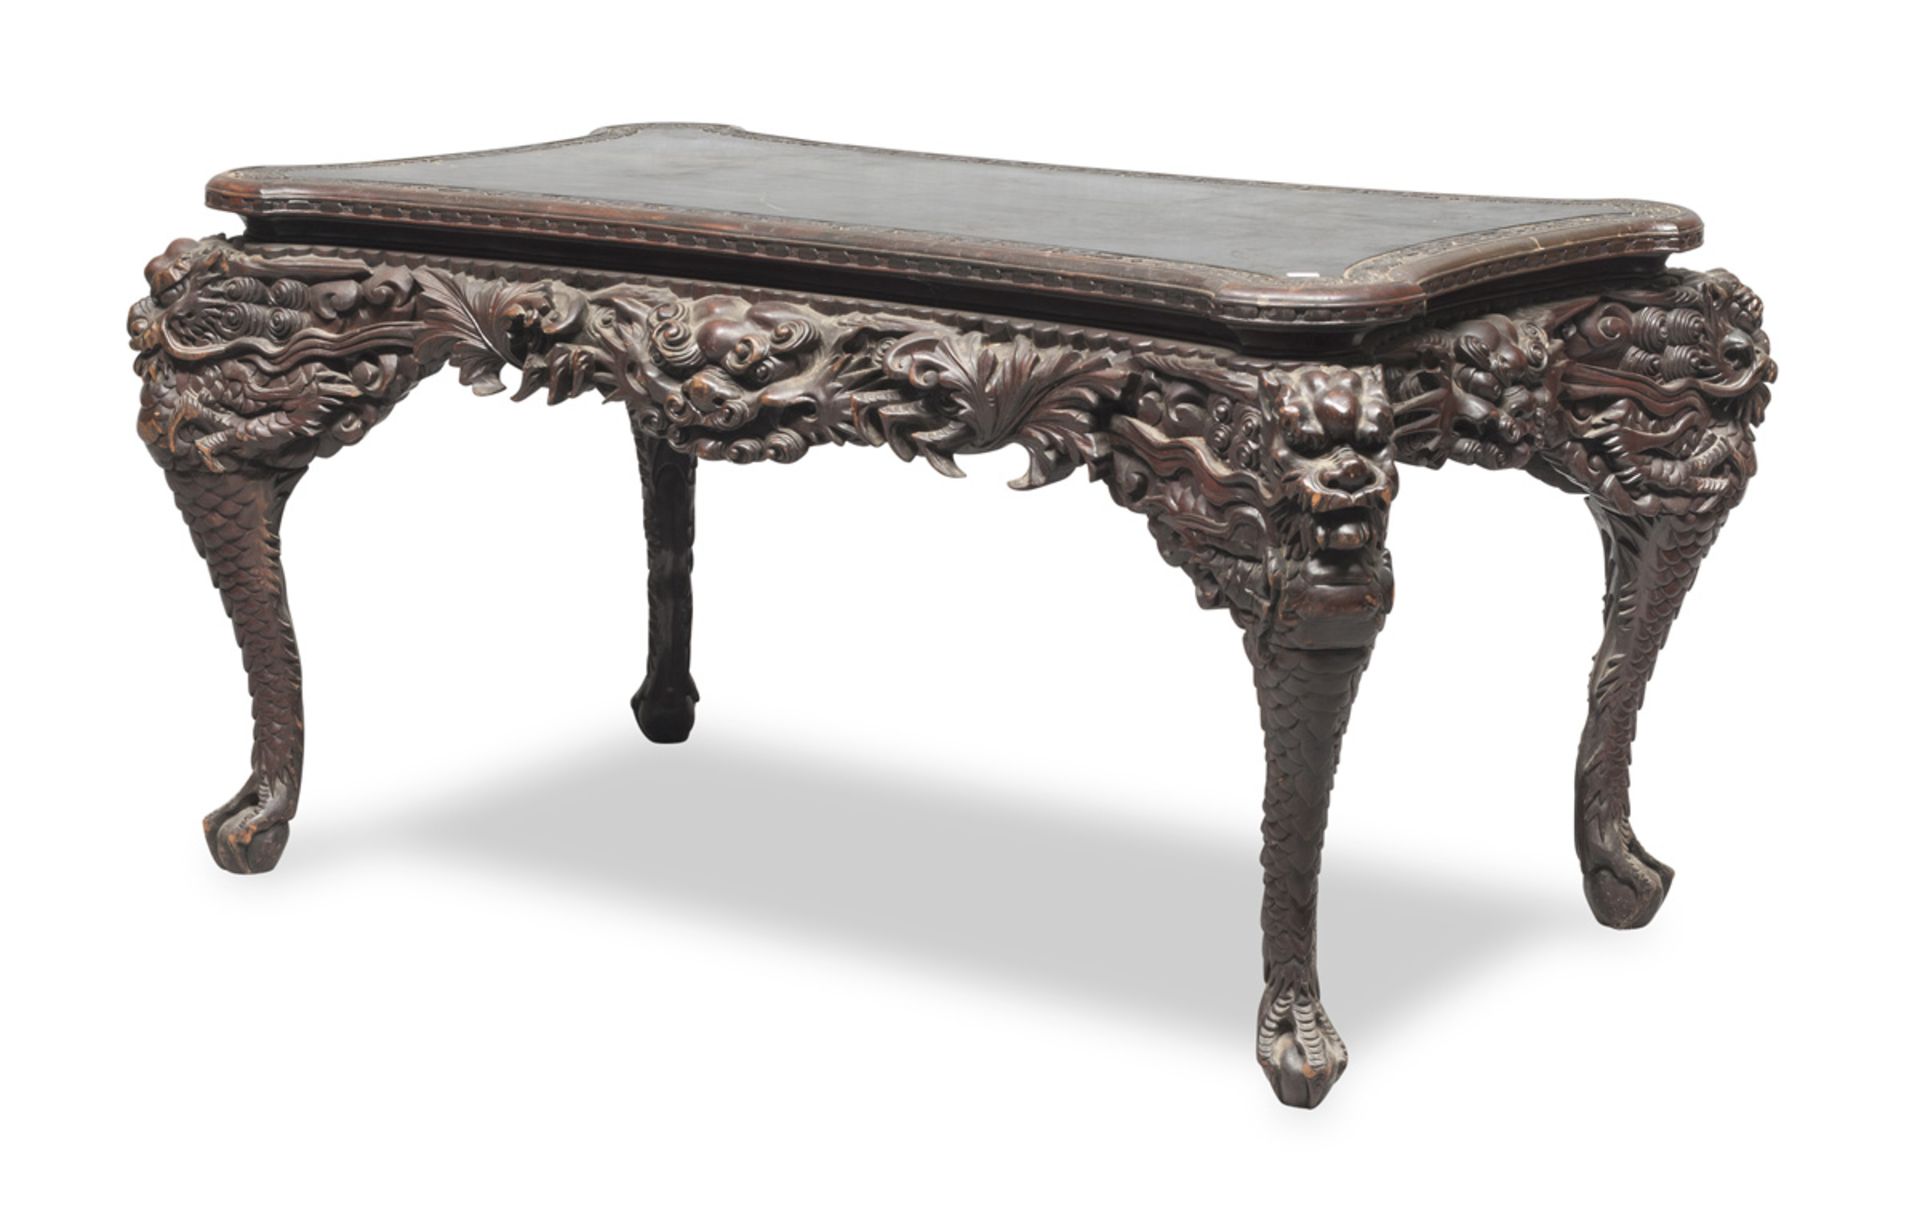 COFFEE TABLE IN EBONY CHINA LATE 19TH CENTURY